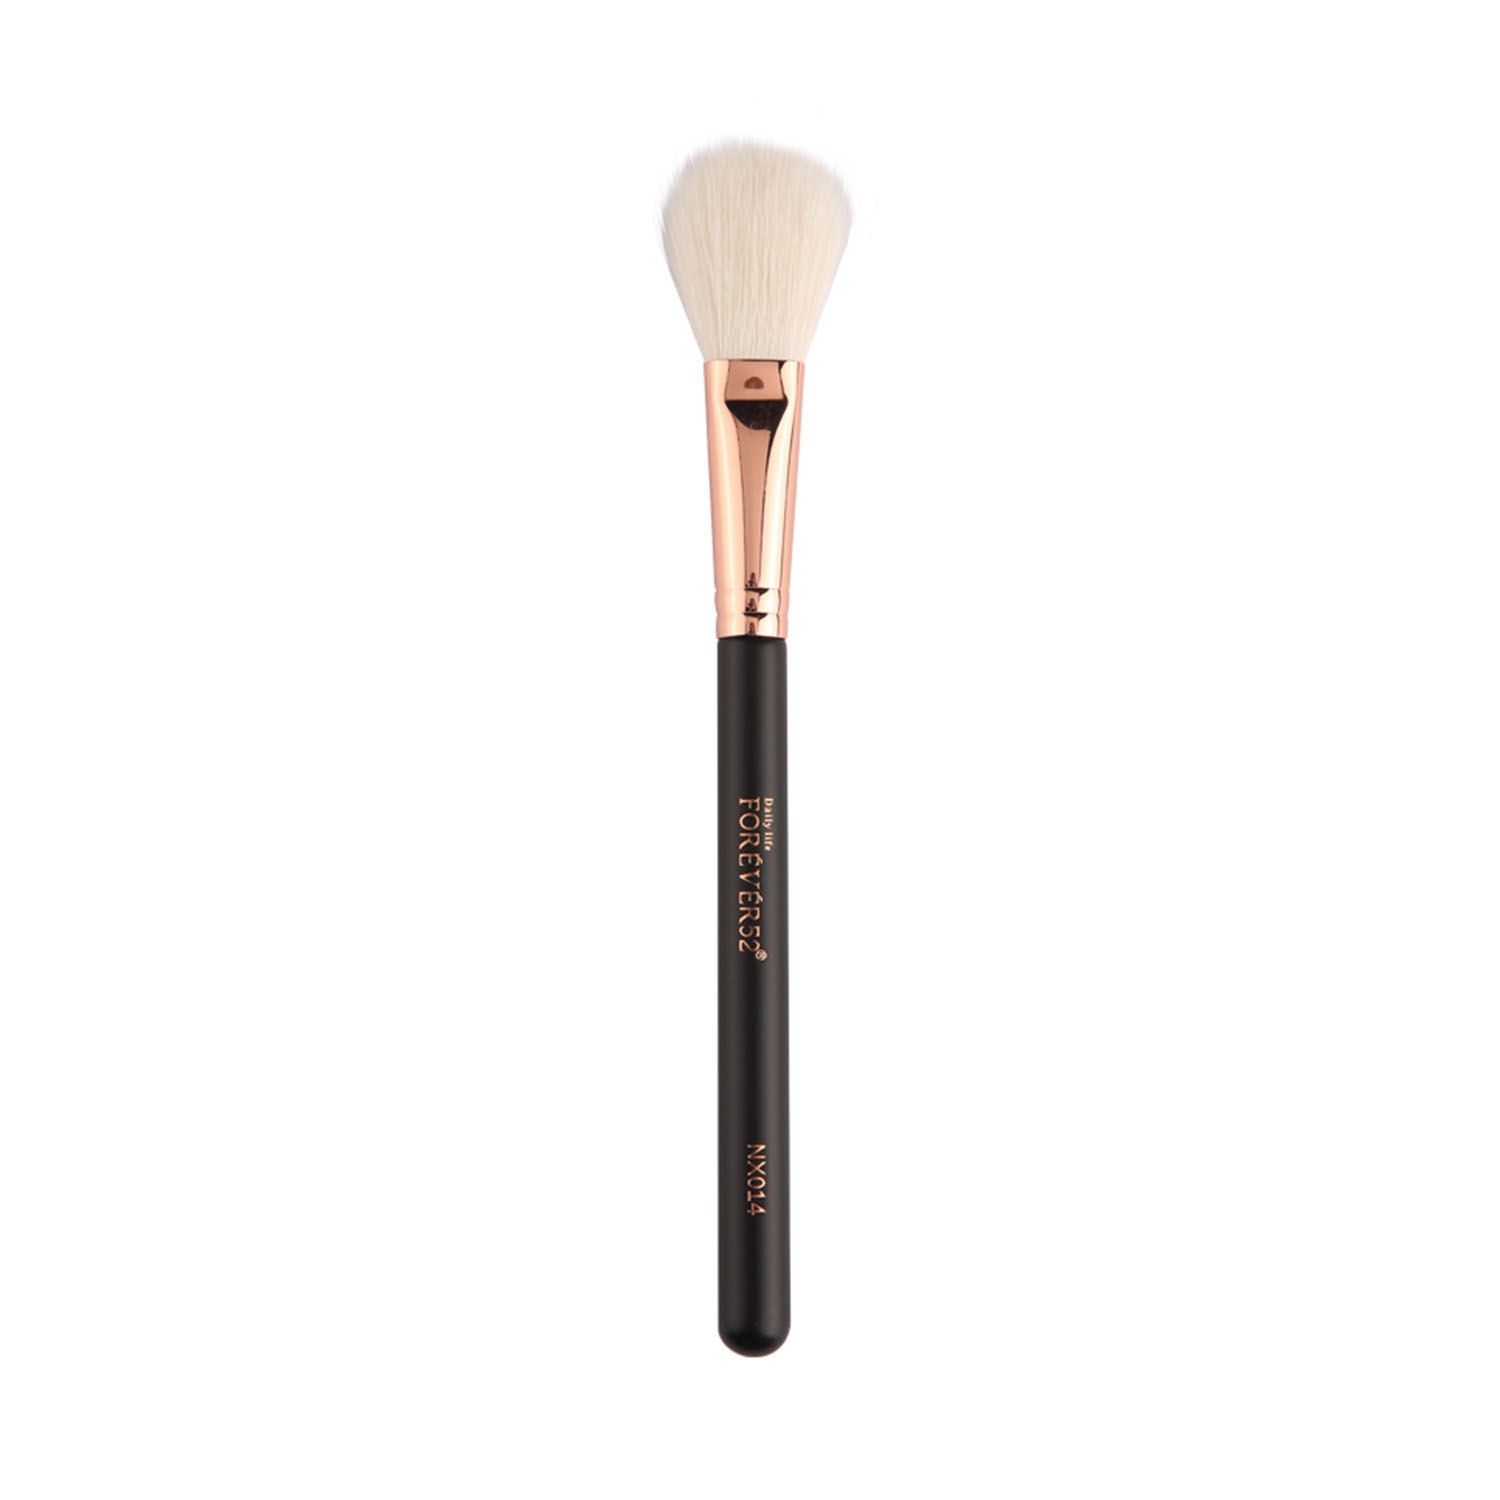 Daily Life Forever52 | Daily Life Forever52 Blush Brush - NX014 (1Pc)